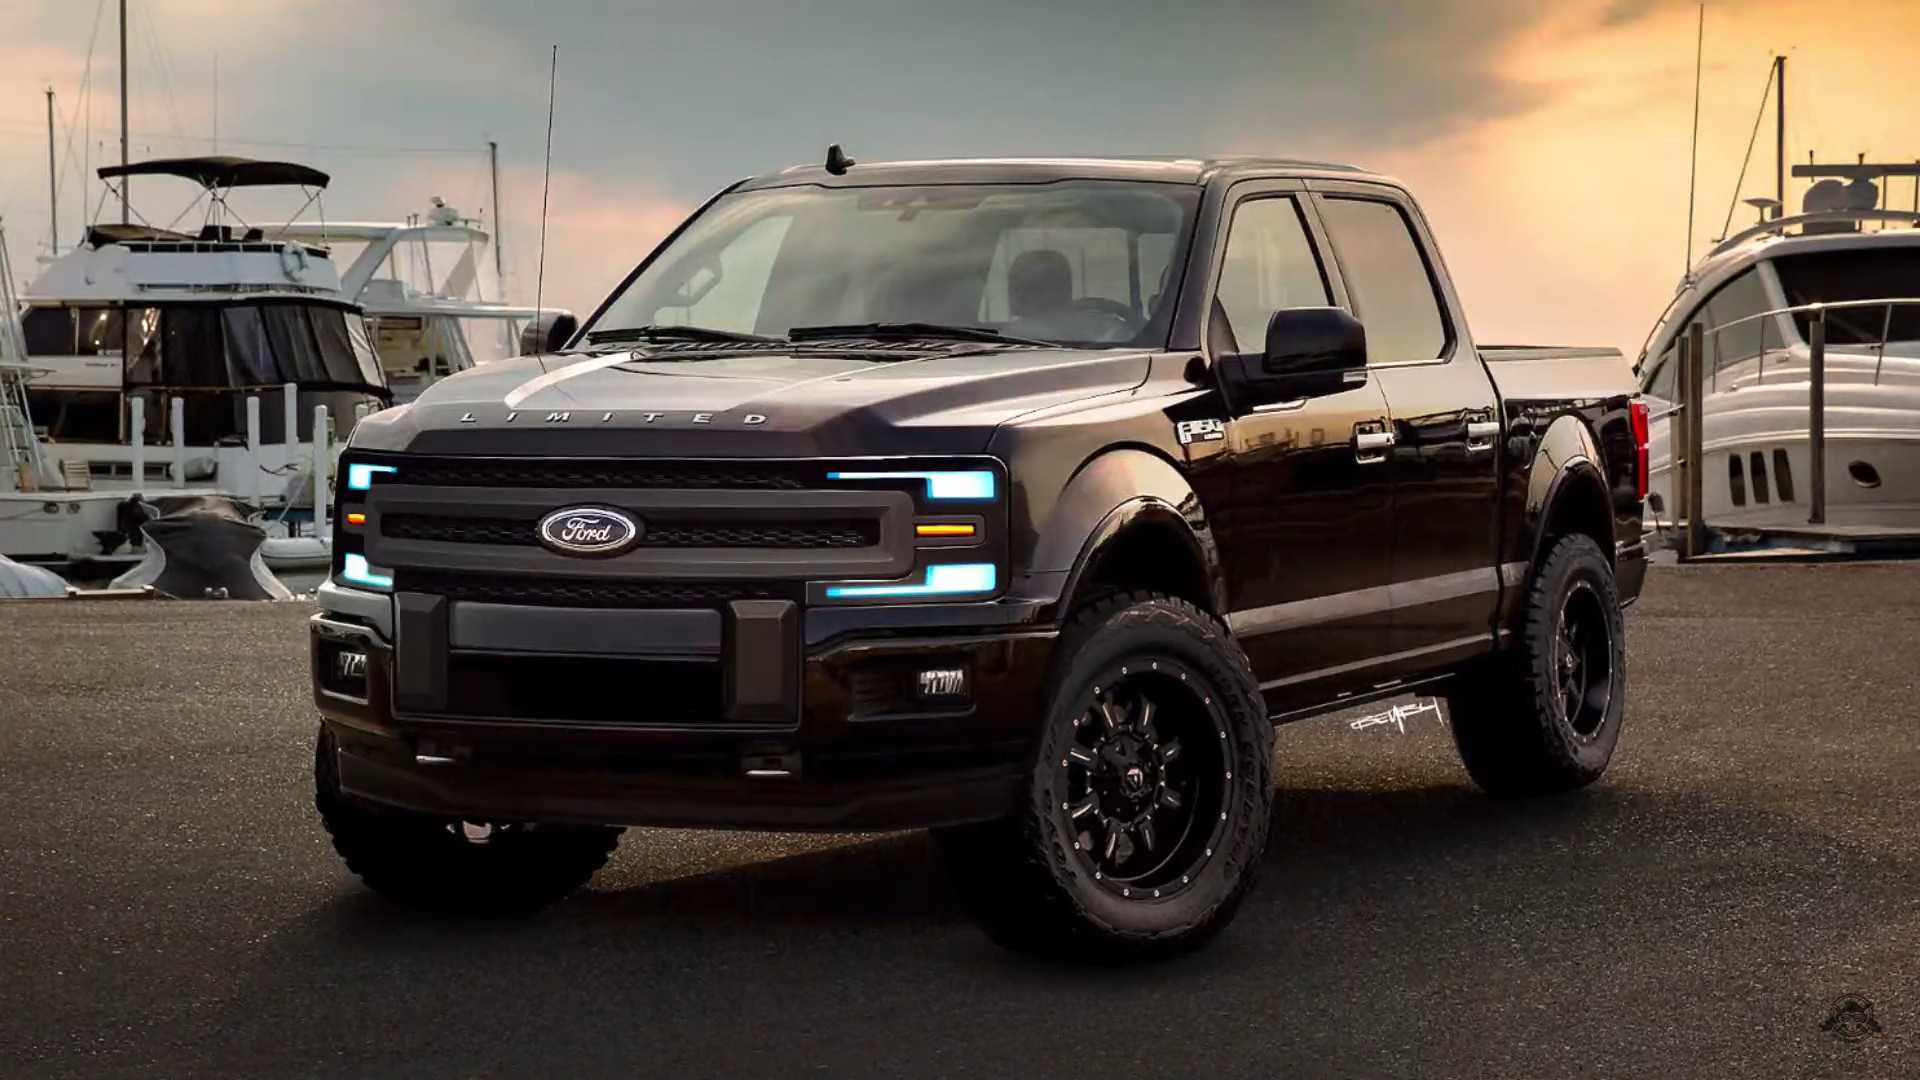 46+ 2015 Ford F150 Wallpaper Entertainment System HD download